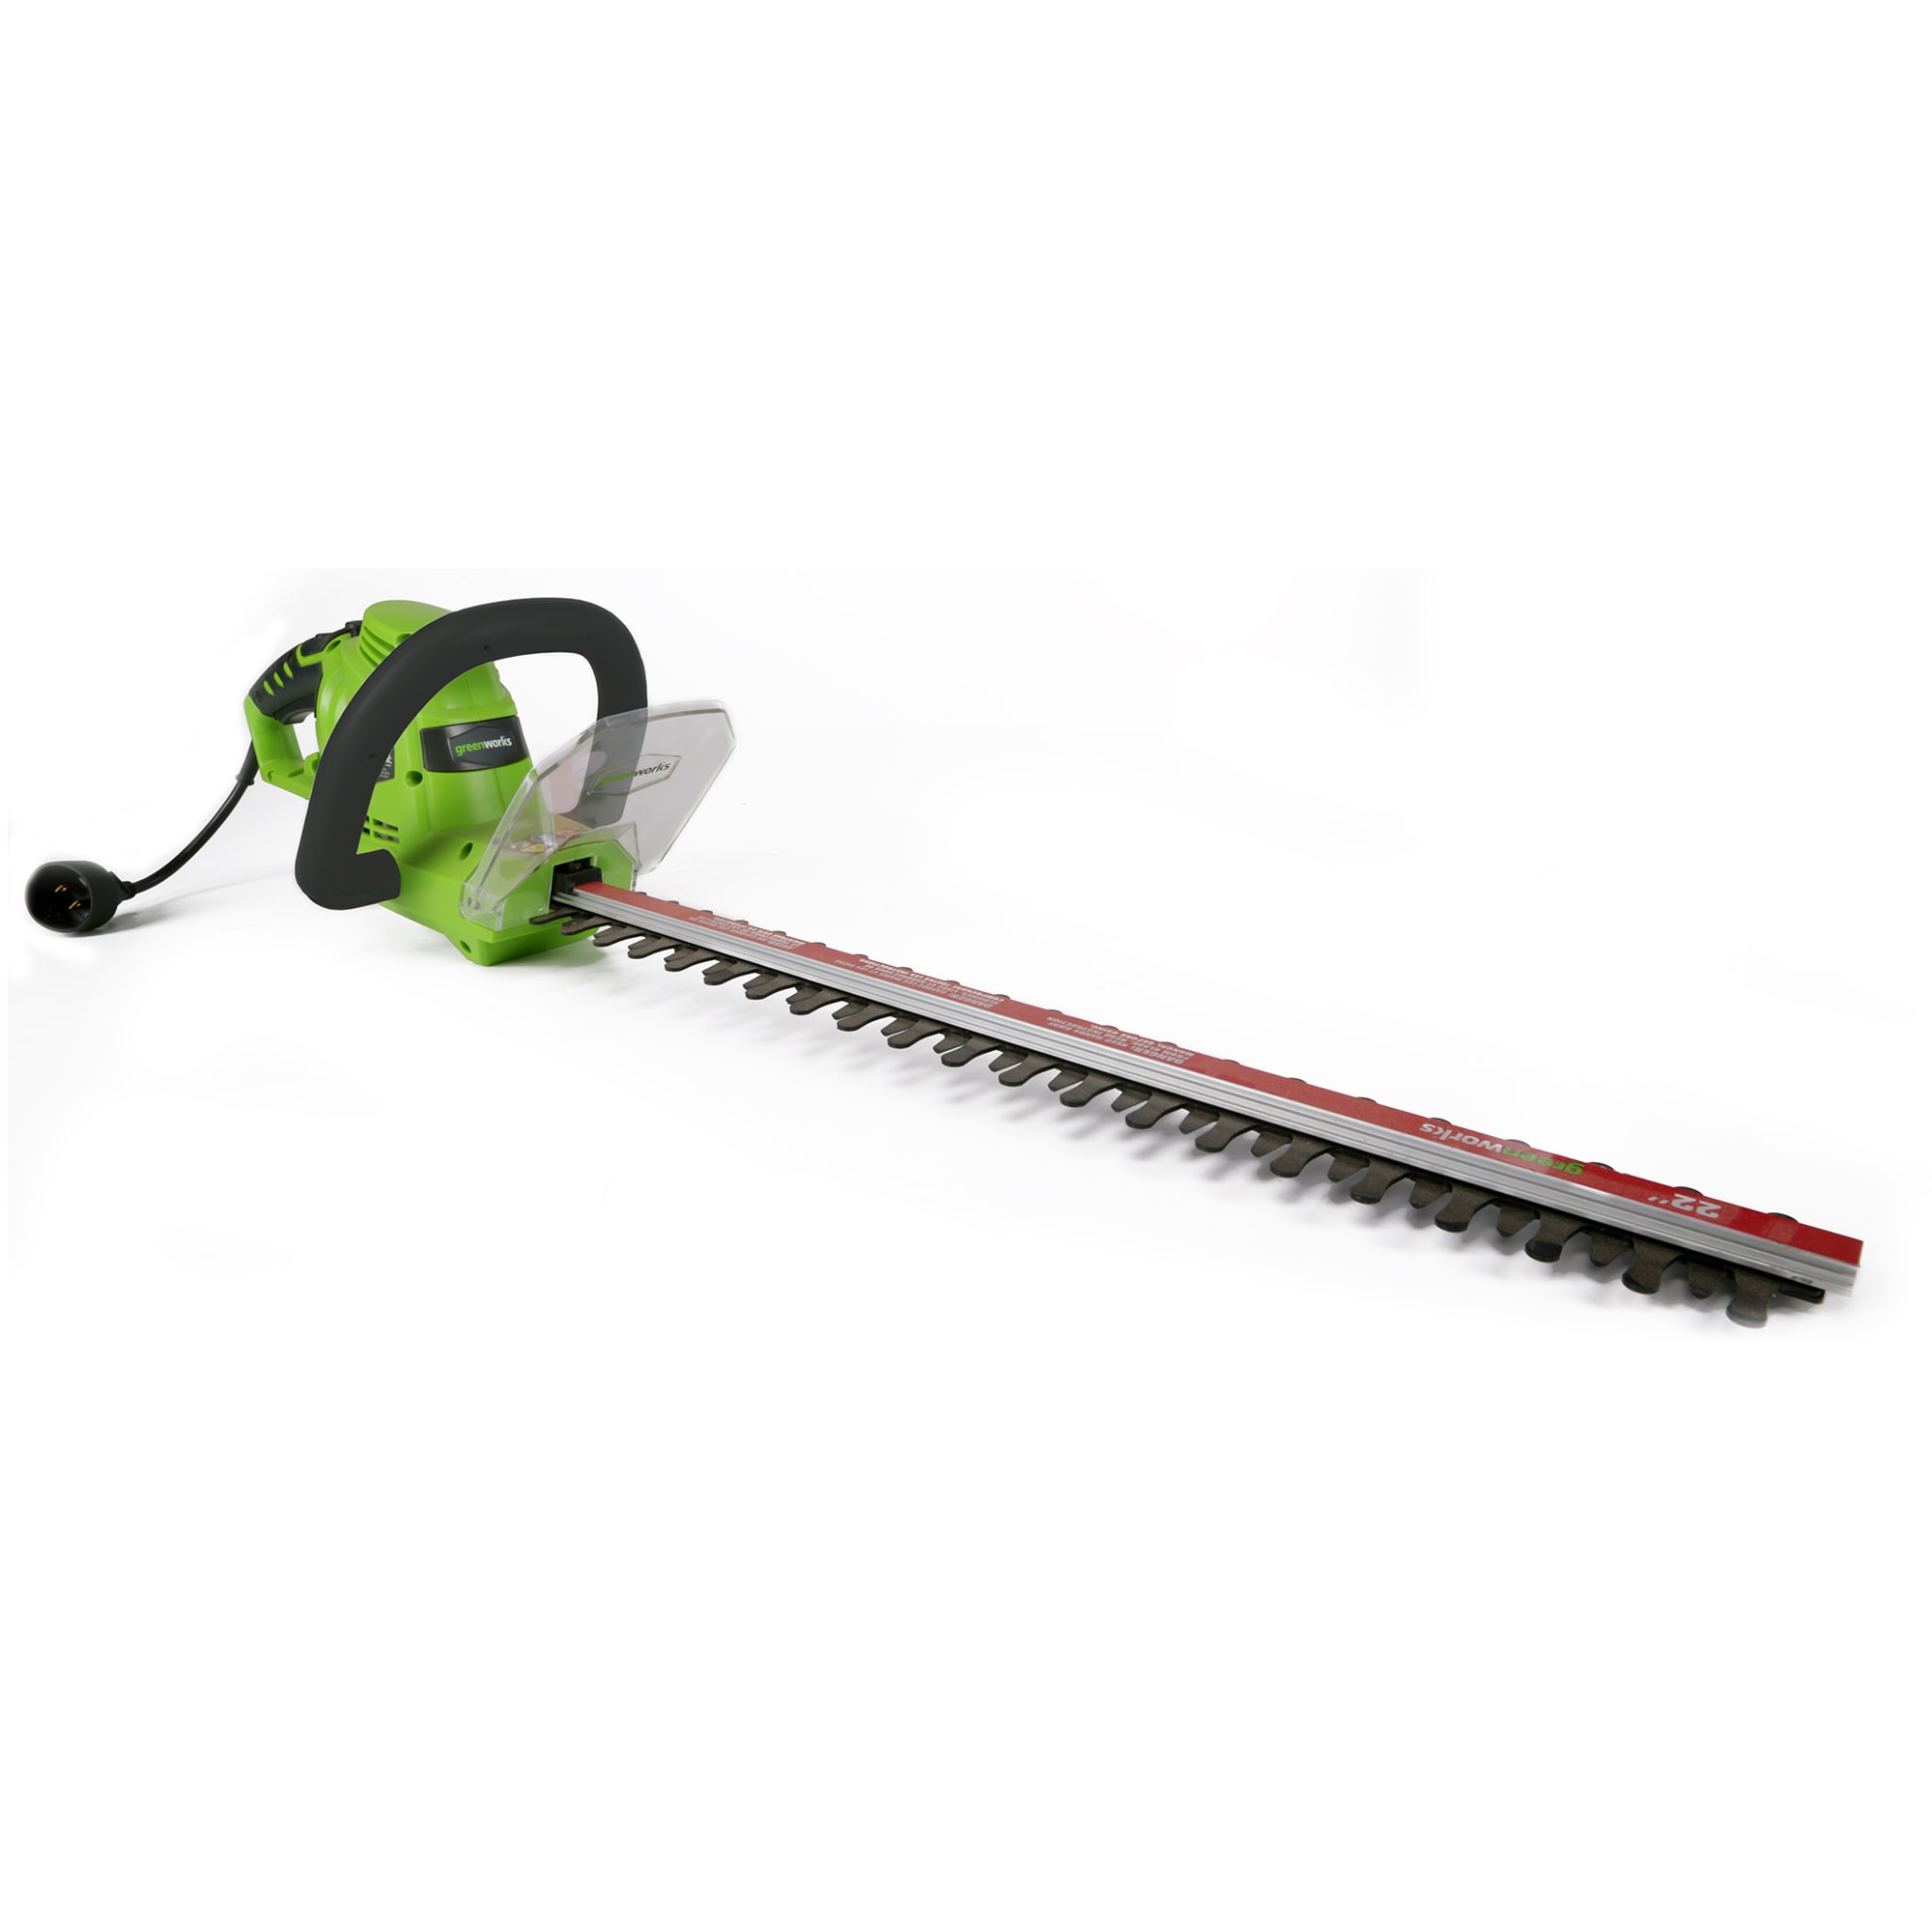 22 Electric Hedge Trimmer-Like New- - general for sale - by owner -  craigslist